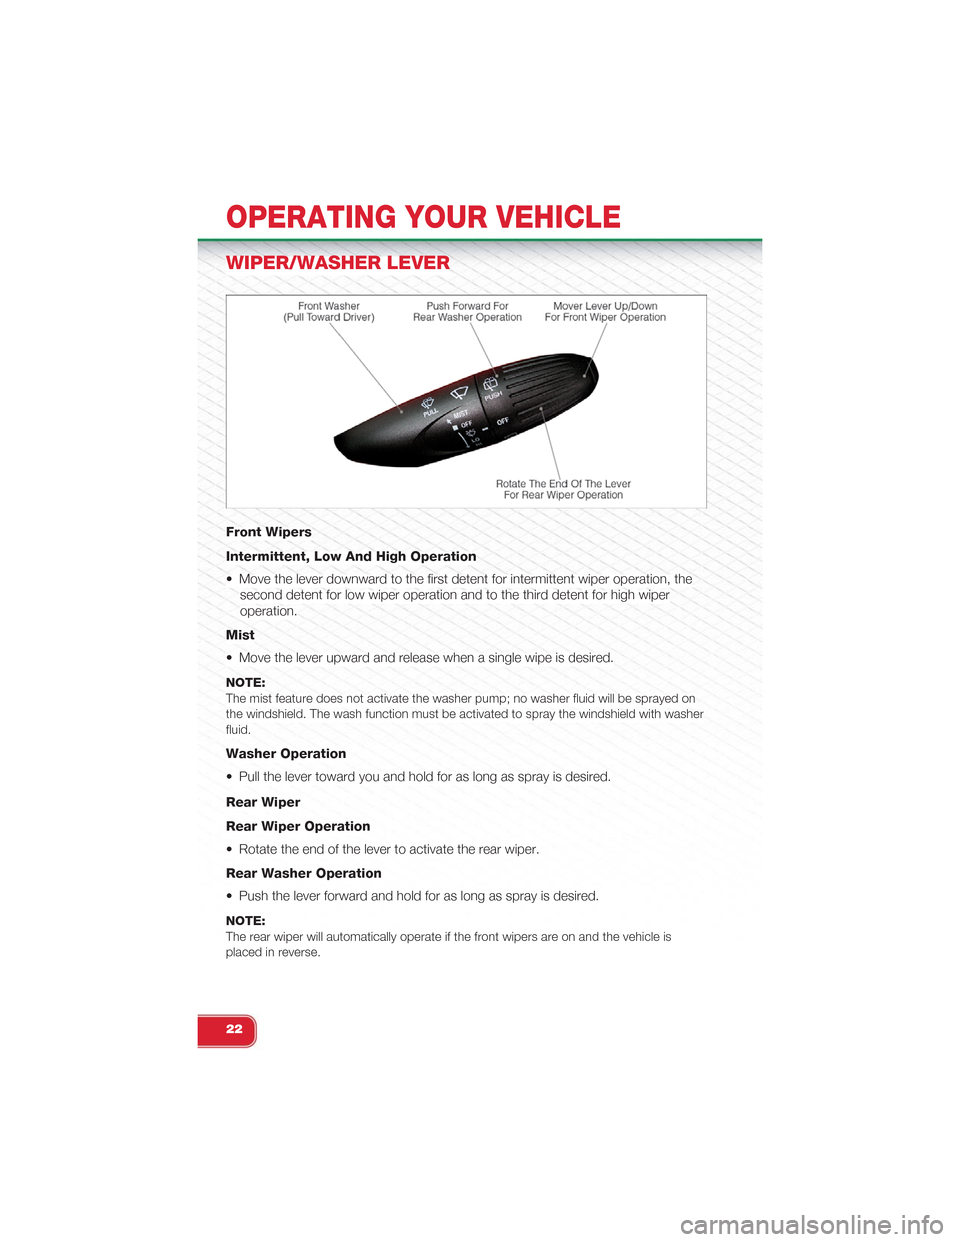 FIAT 500 ABARTH 2014 2.G Owners Manual WIPER/WASHER LEVER
Front Wipers
Intermittent, Low And High Operation
• Move the lever downward to the first detent for intermittent wiper operation, the
second detent for low wiper operation and to 